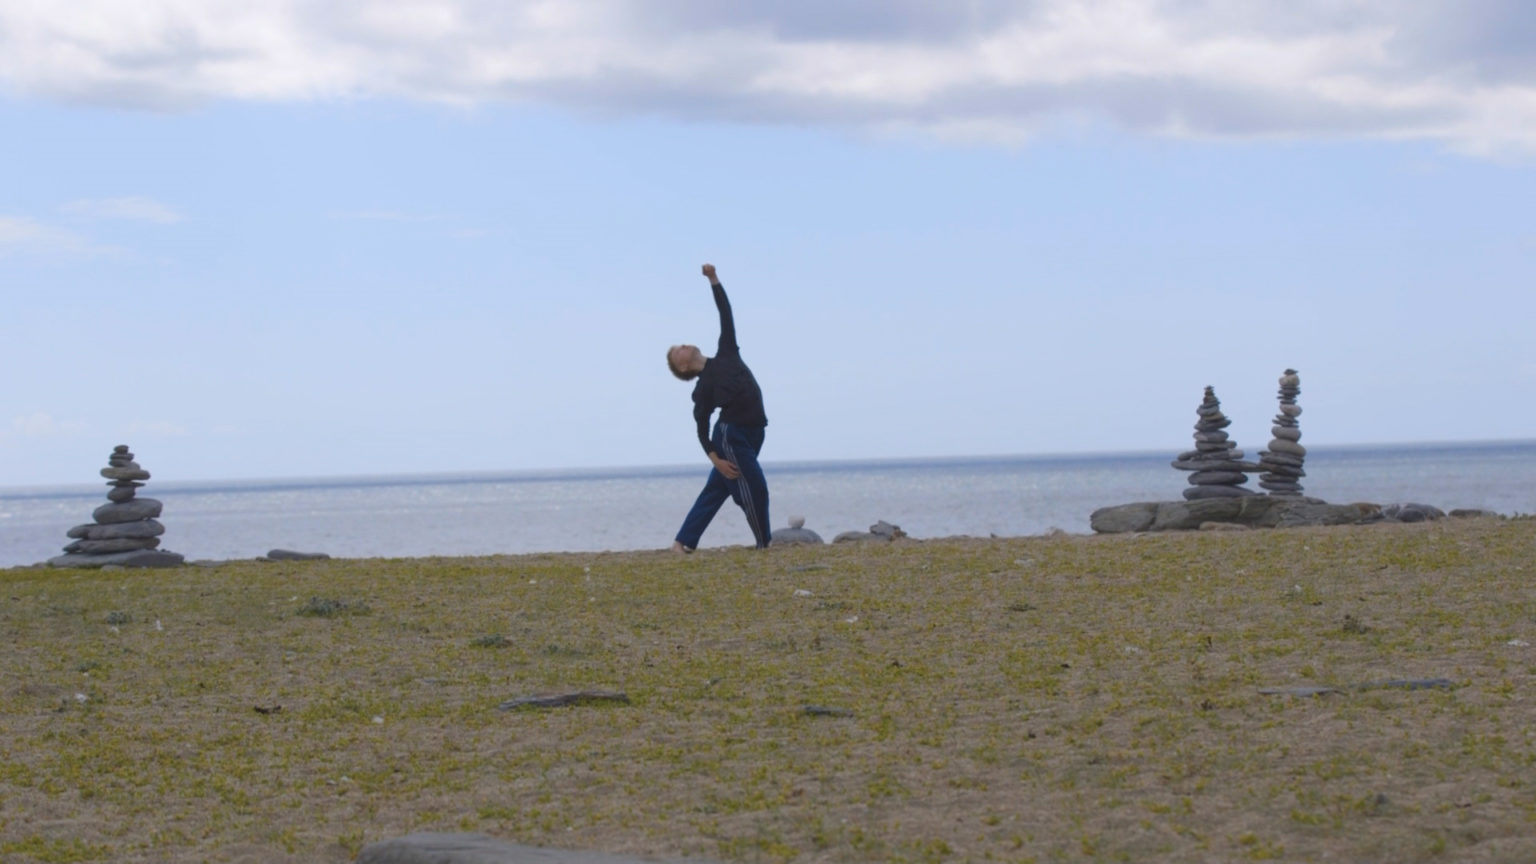 Person reaching to the sky with sea in the background, dancing on the beach.